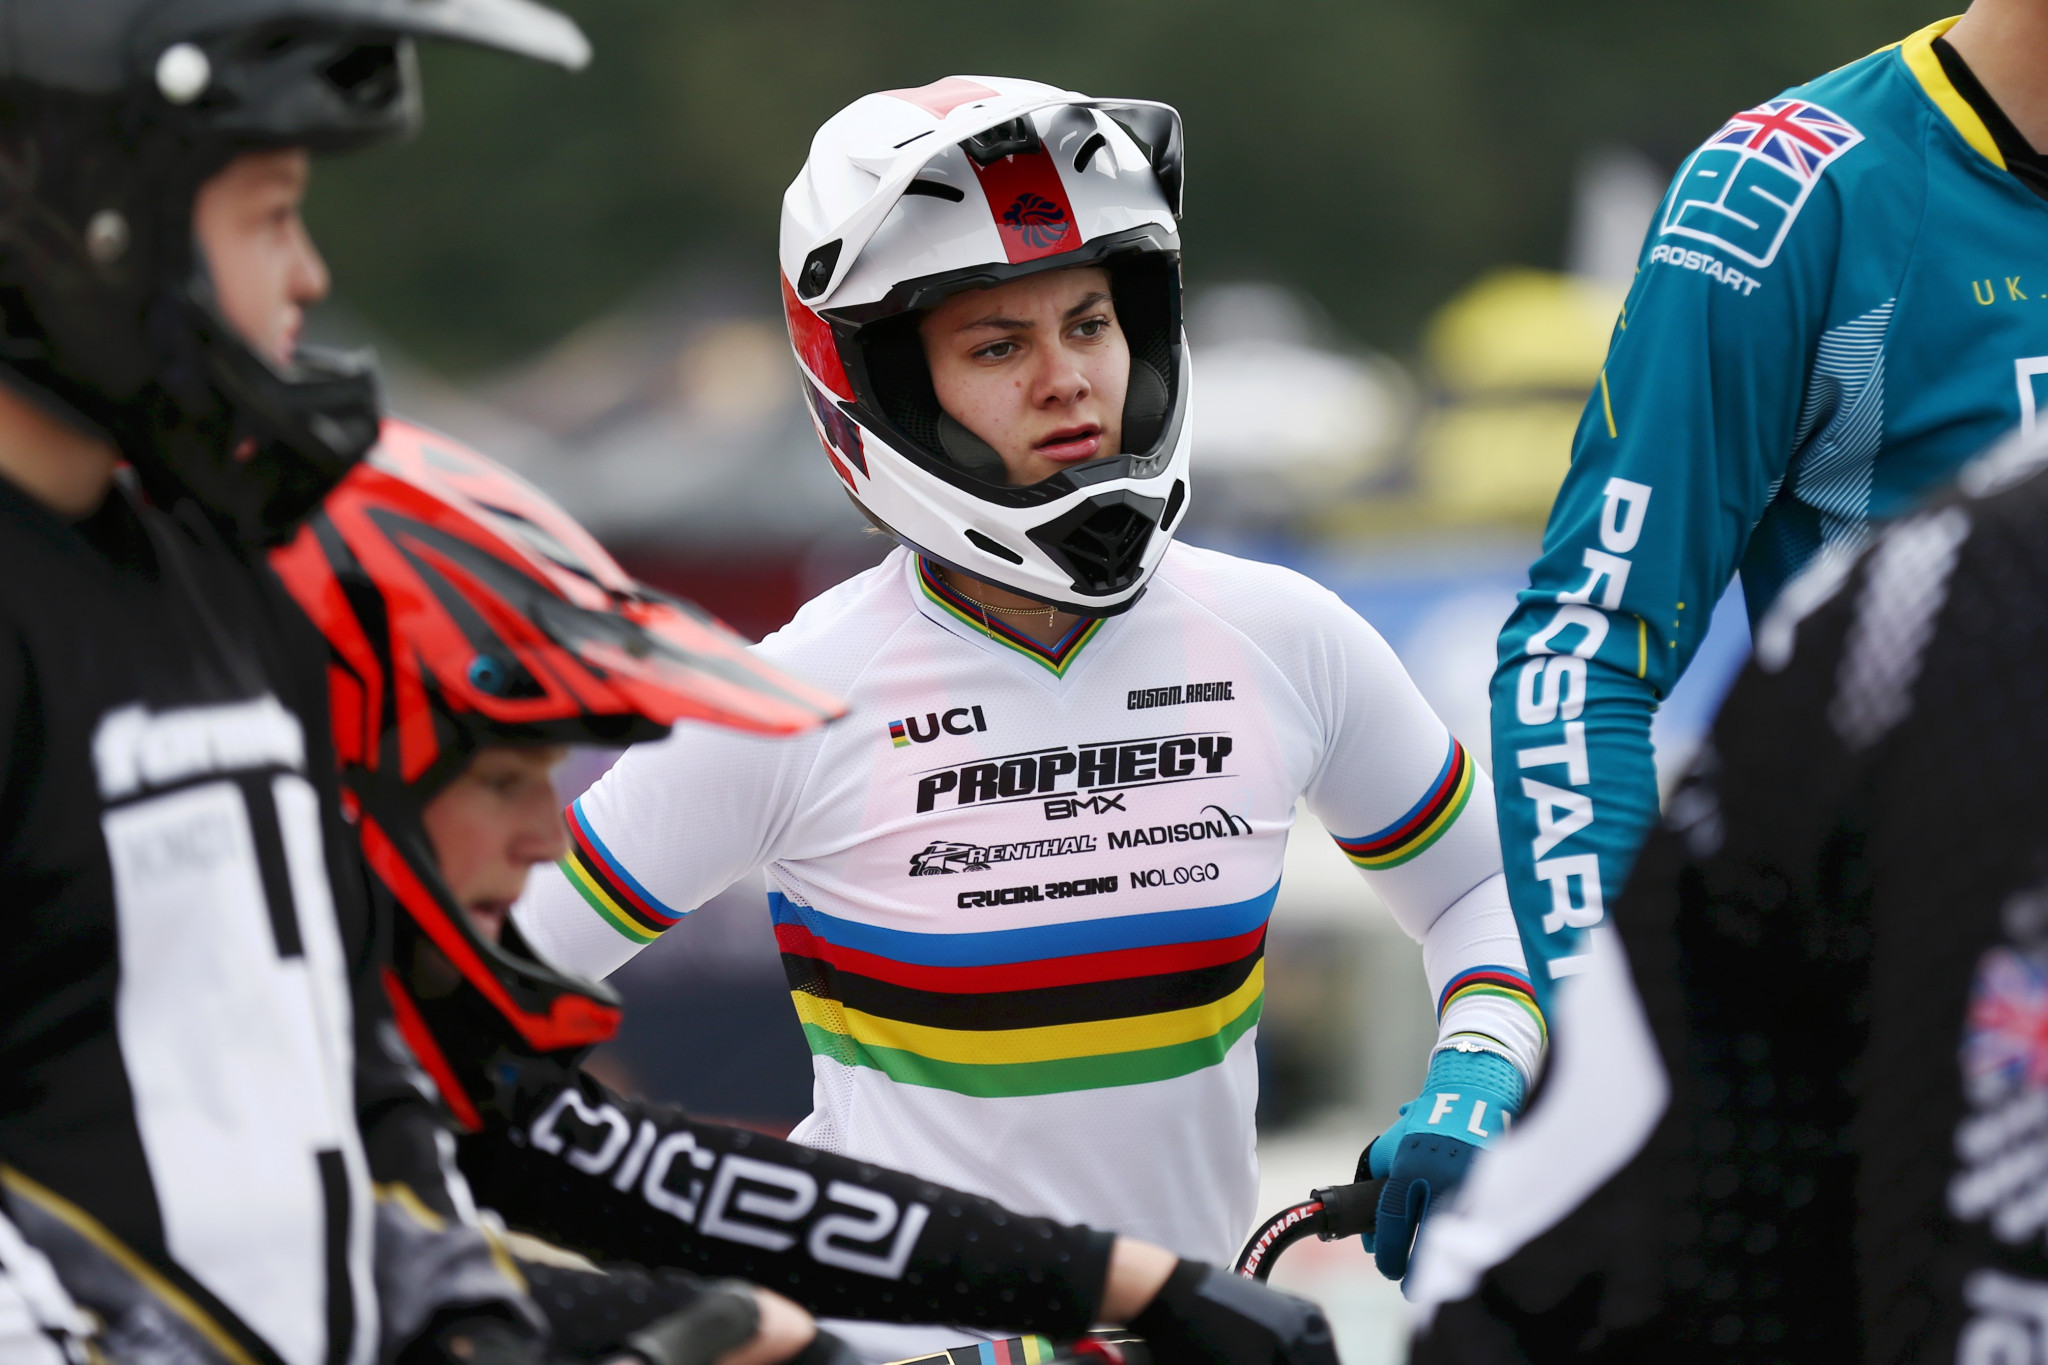 Olympic champion Shriever wins two golds at UCI BMX Racing World Cup opener